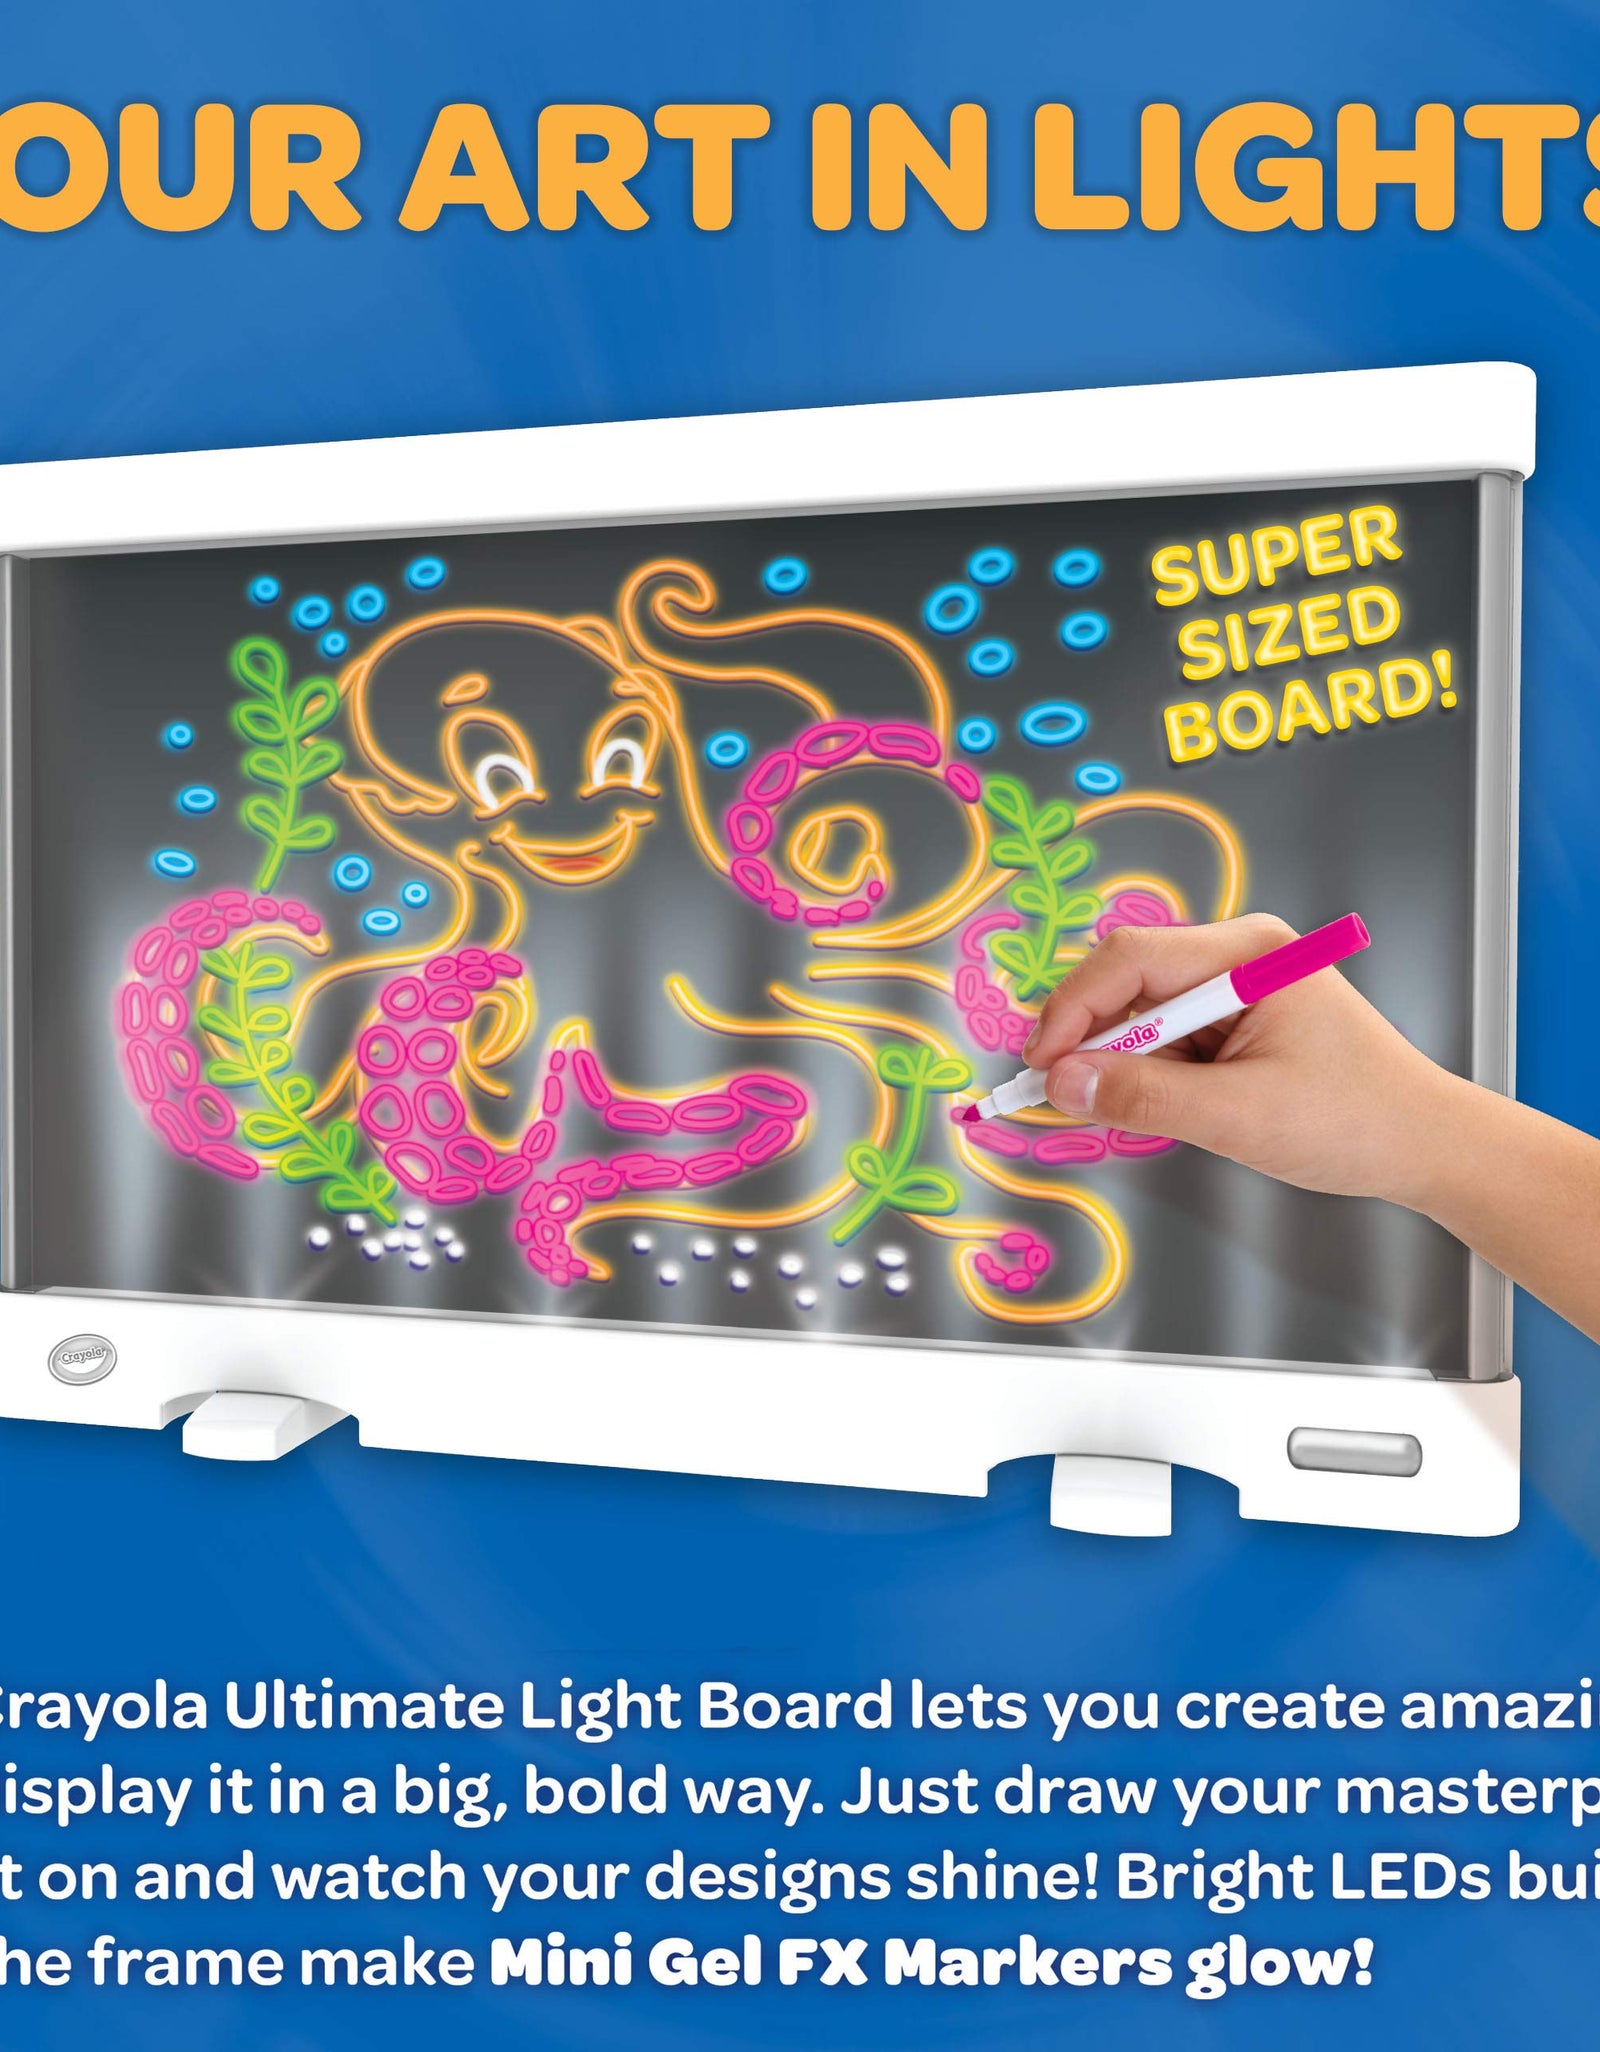 Crayola Ultimate Light Board Drawing Tablet, Gift for Kids, Ages 6, 7, 8, 9 White